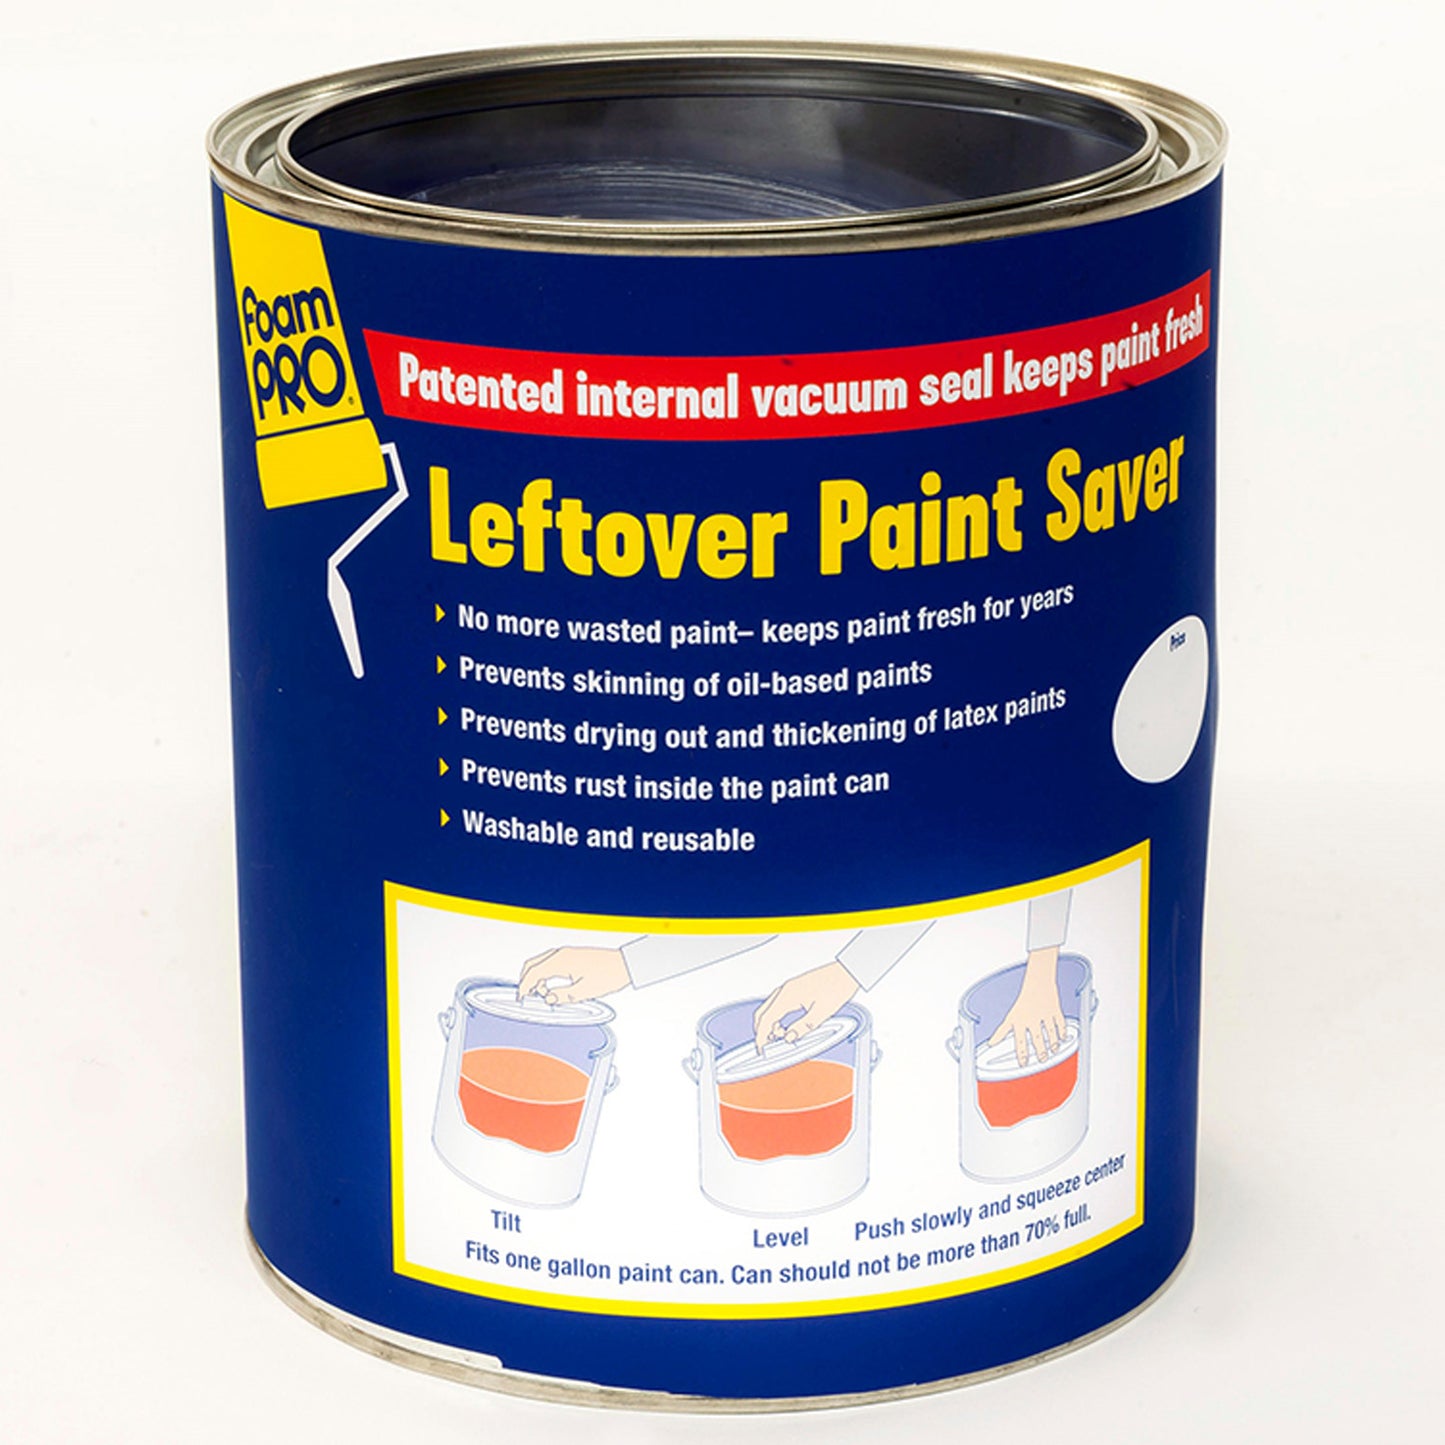 Leftover Paint Saver - Protects Paint From Air Inside Cans